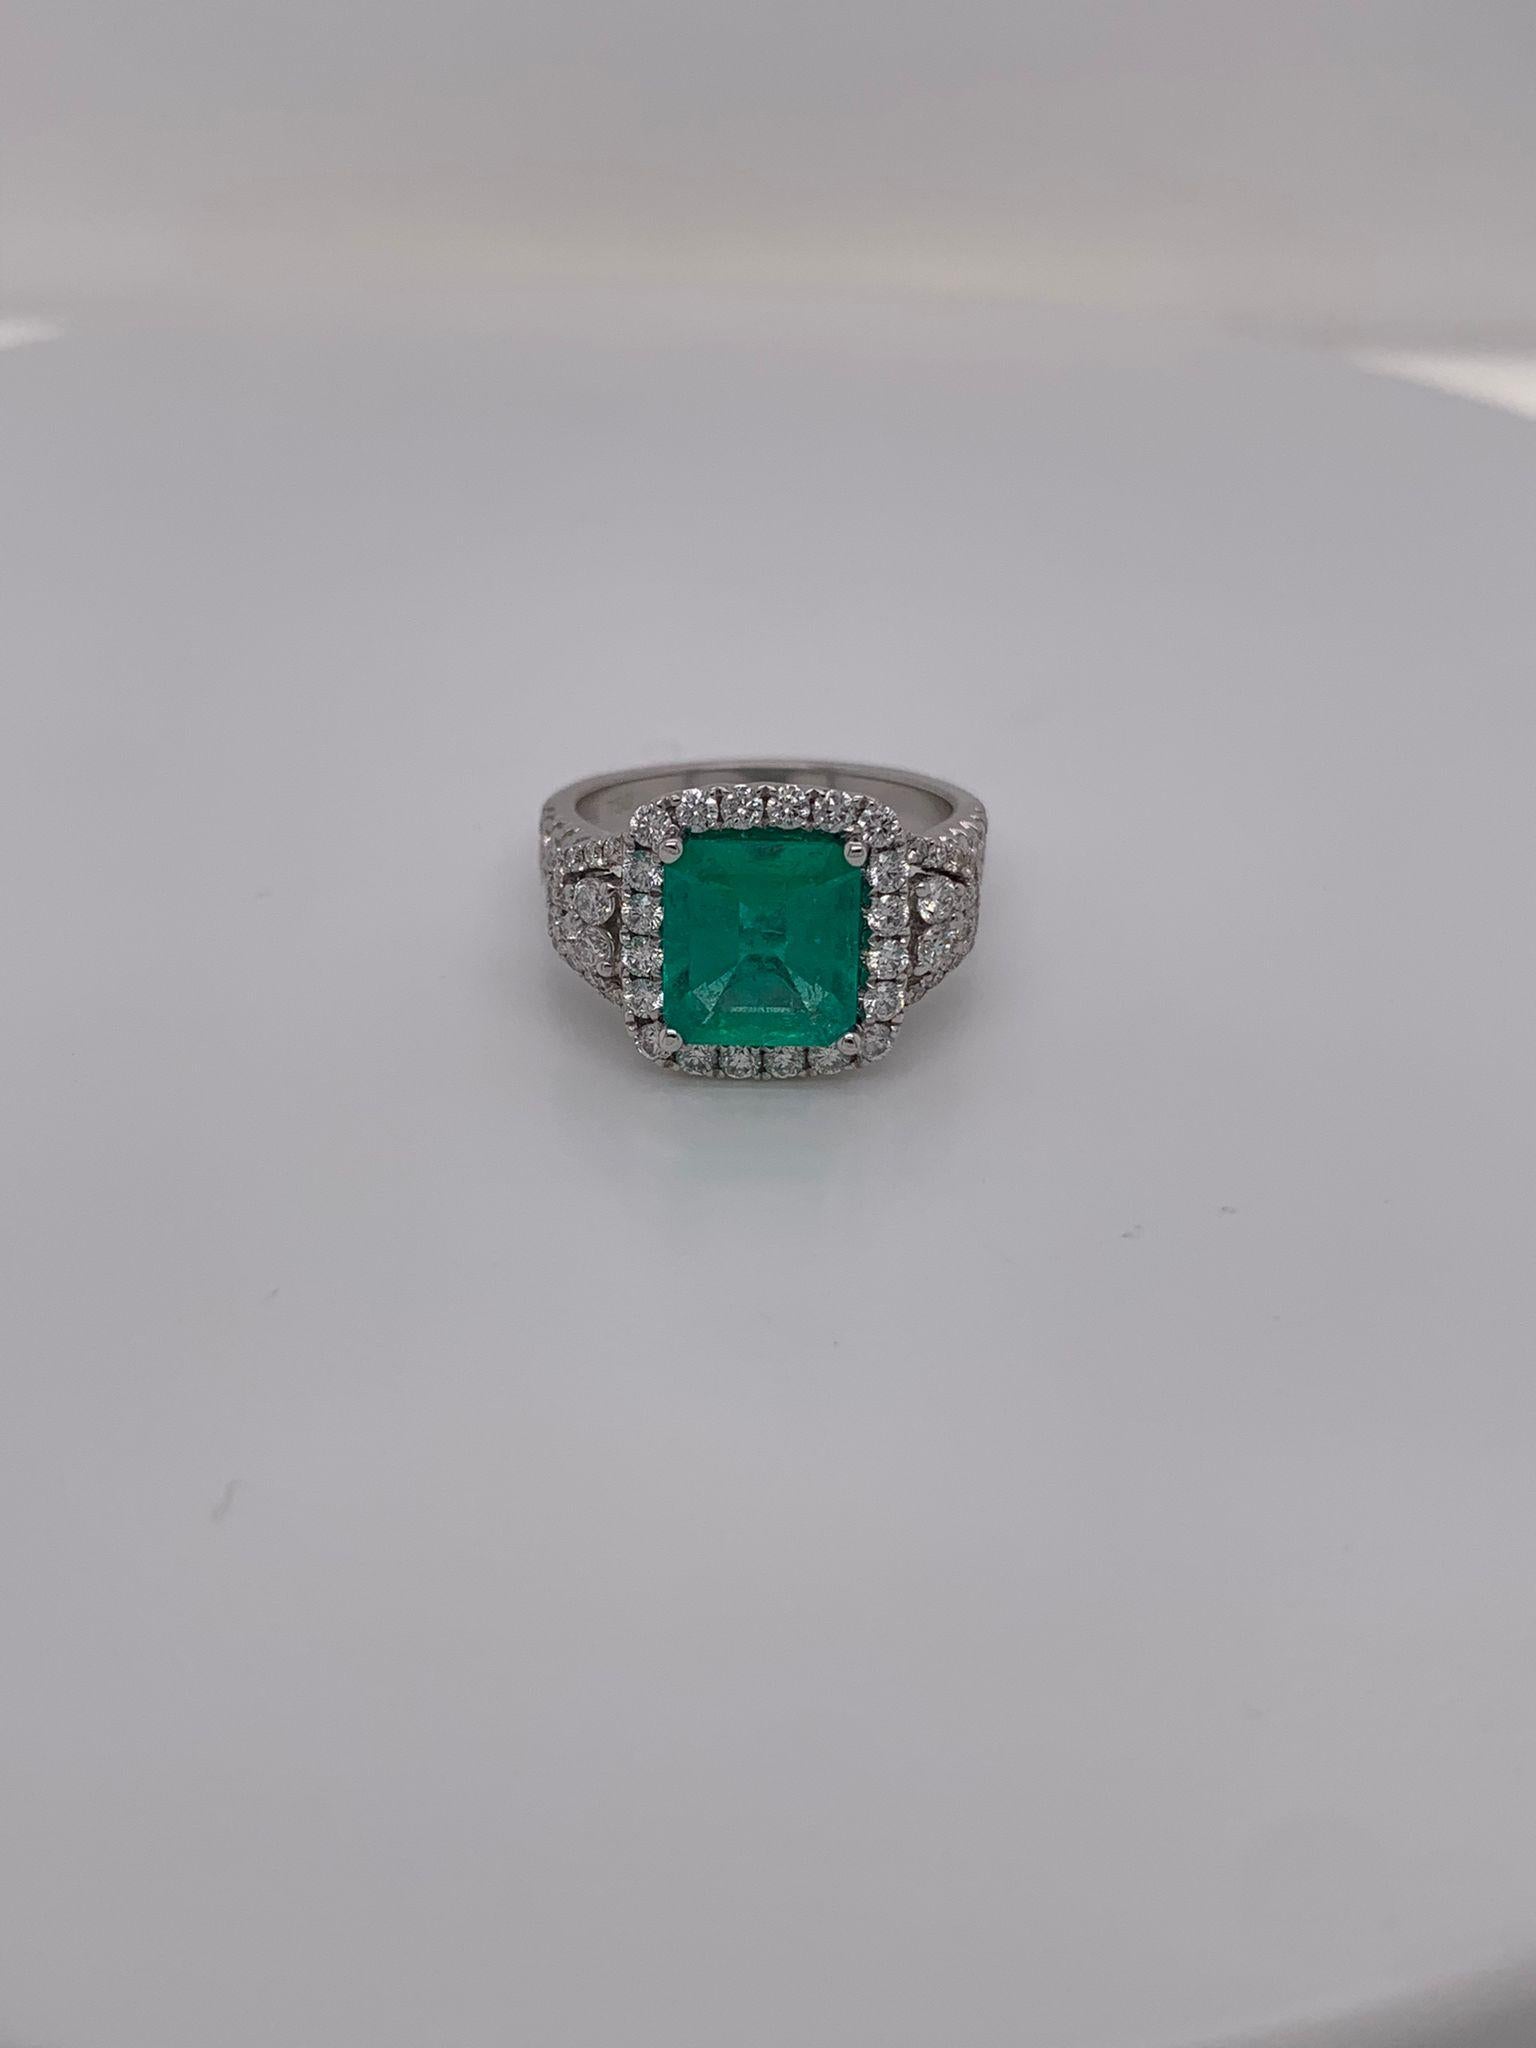 Square emerald weighing 1.86 cts
Measuring (8.6x7.8) mm
68 Round Diamonds weighing .95 cts
Set in 18K white gold ring